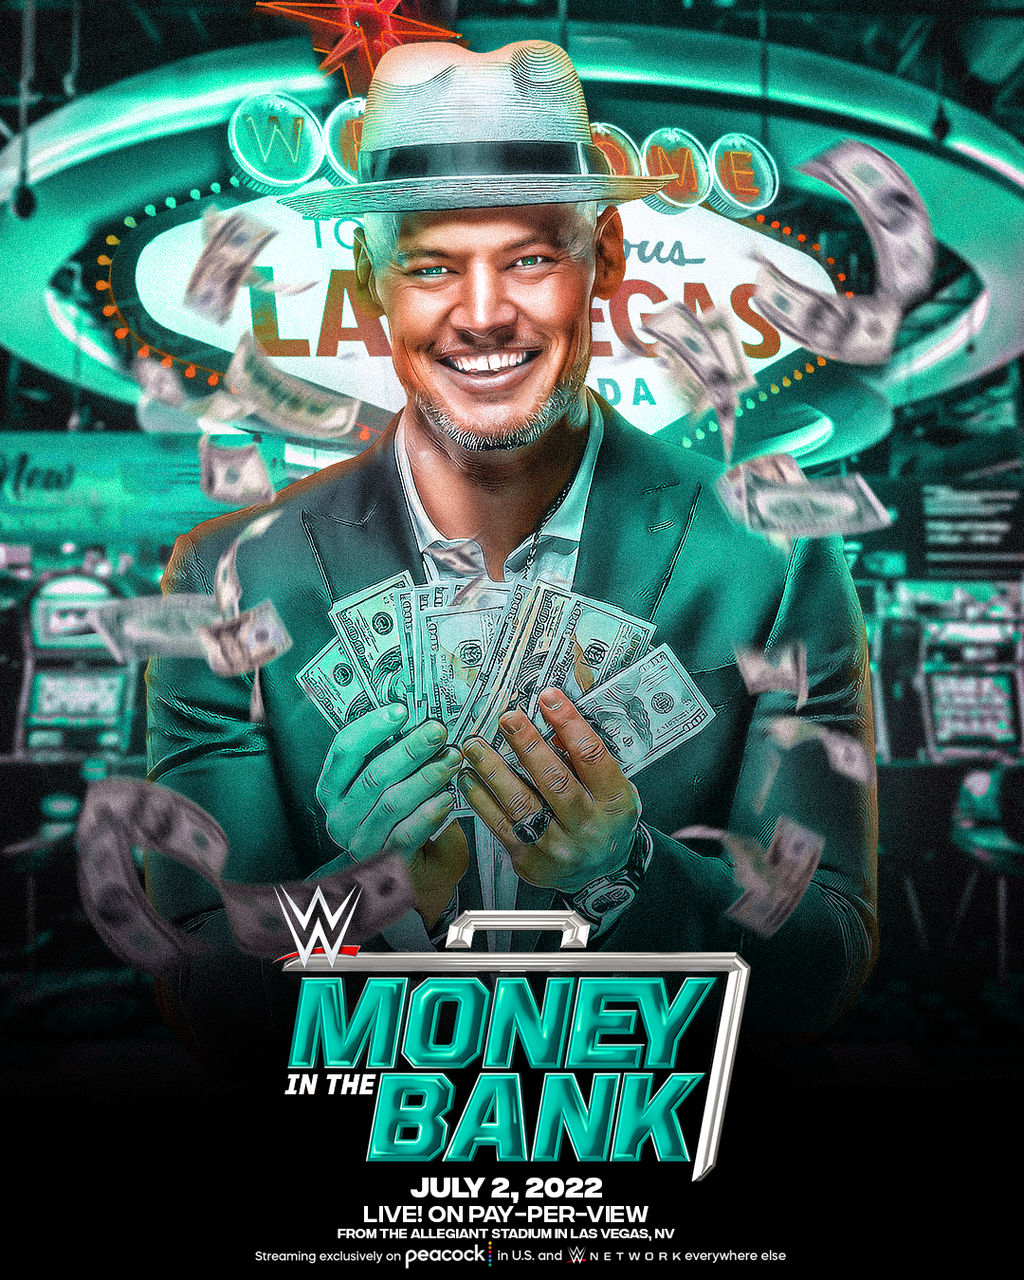 WWE Money in the Bank 2022 Poster Art by OzanFlair on DeviantArt